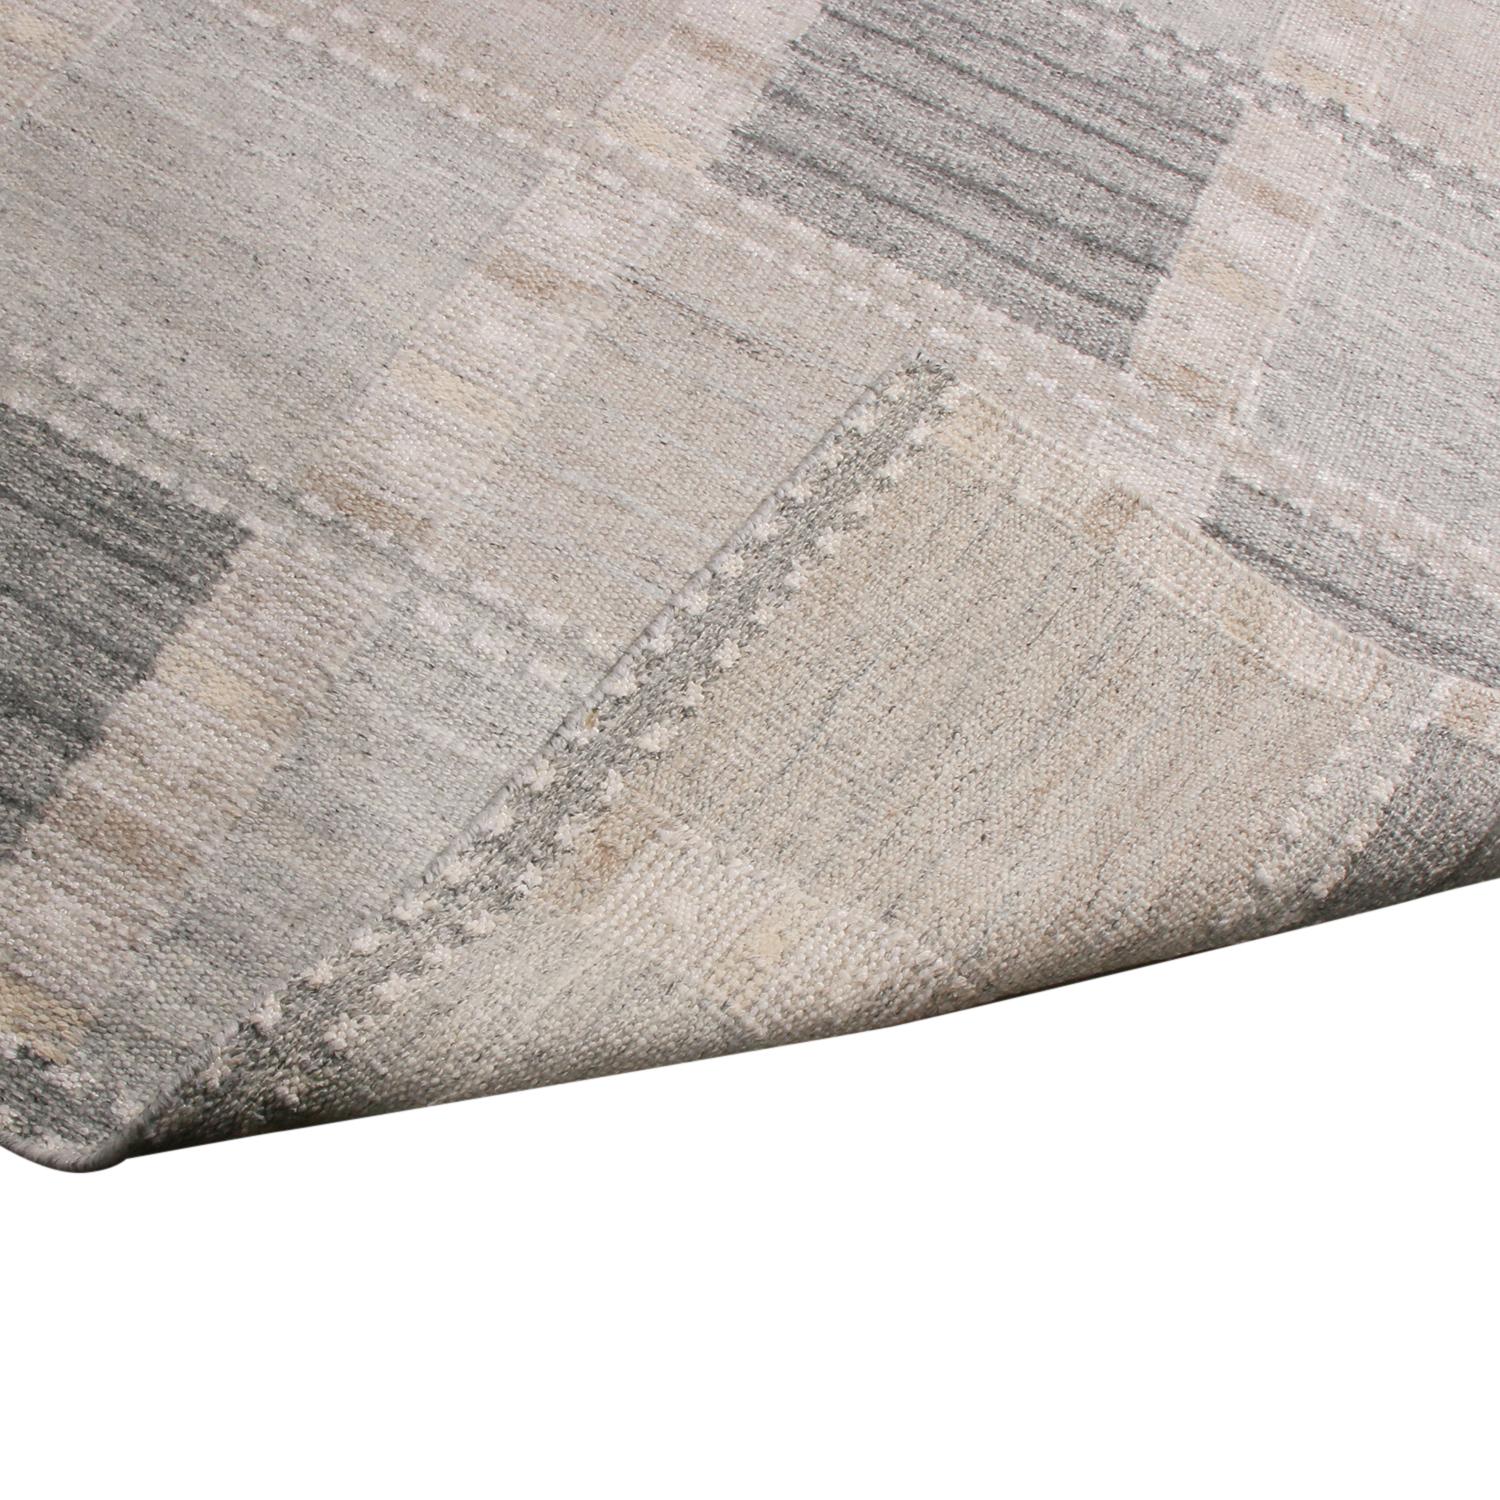 Hand-Knotted Rug & Kilim’s Scandinavian-Inspired Silver-Gray and Cream White Natural Wool Rug